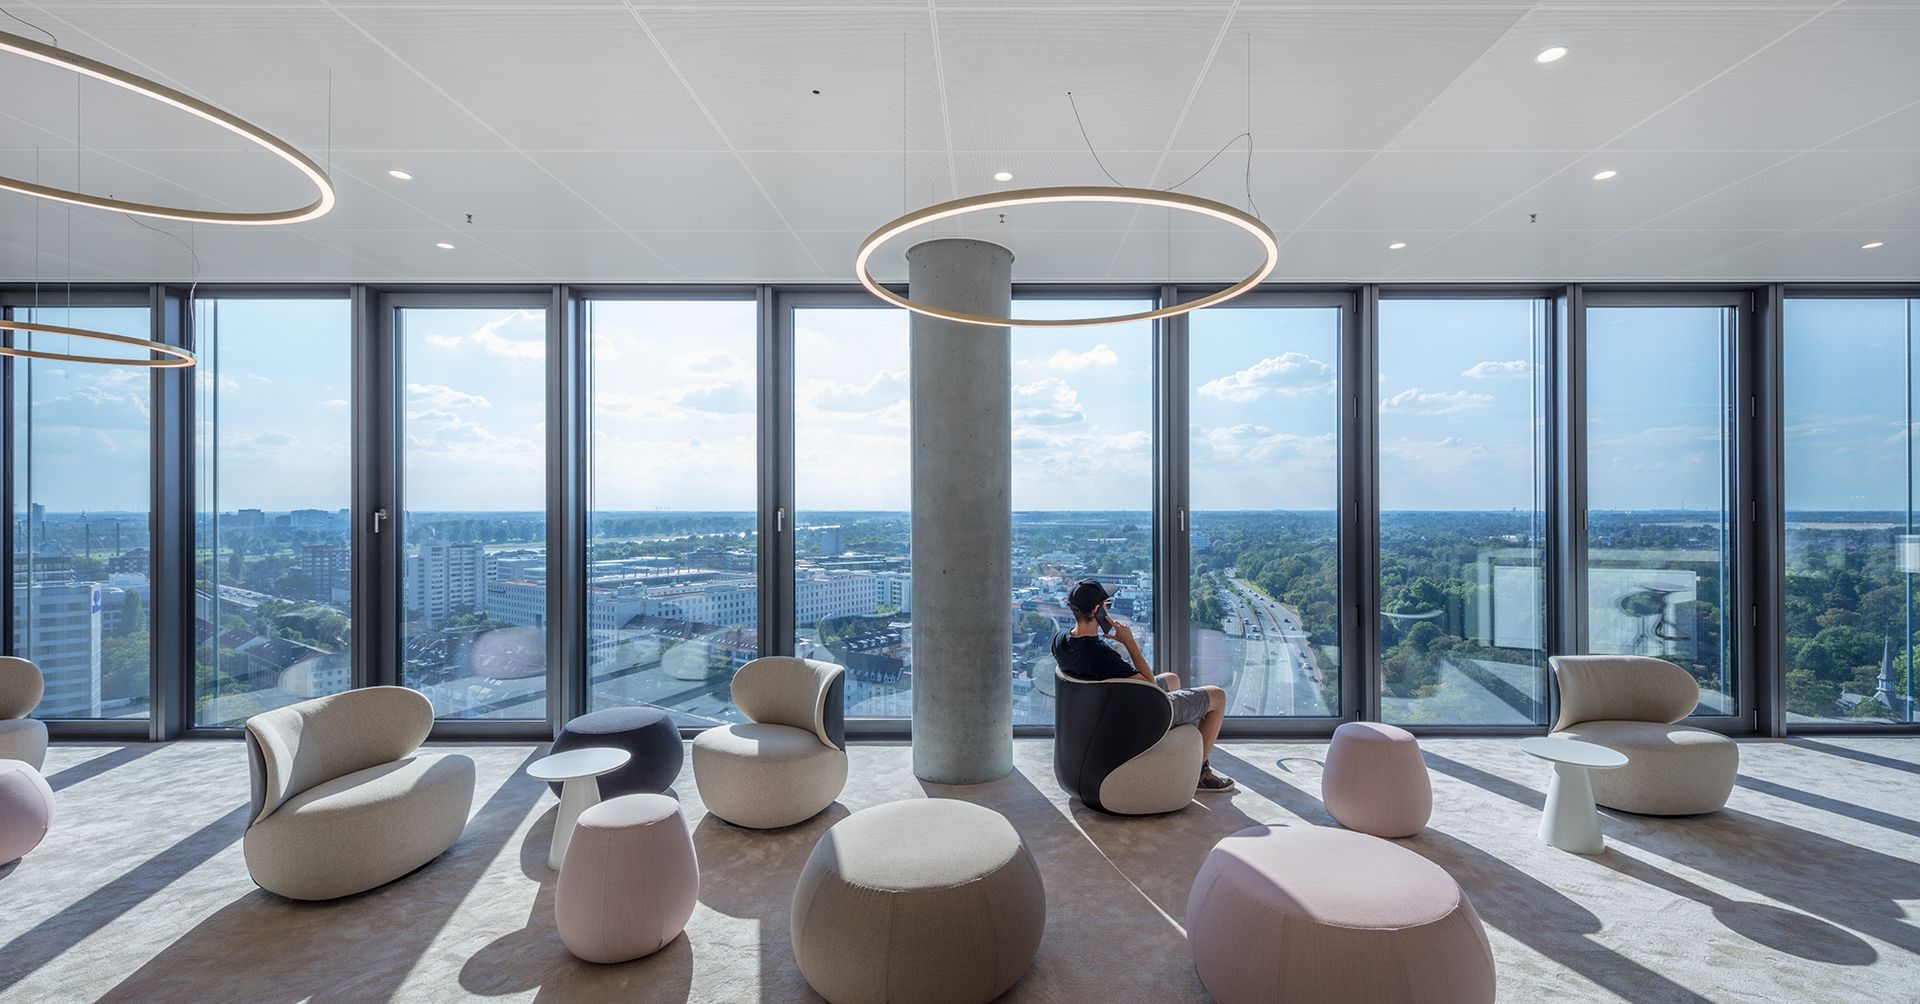 Working environments at L'Oréal Headquarters in Düsseldorf.